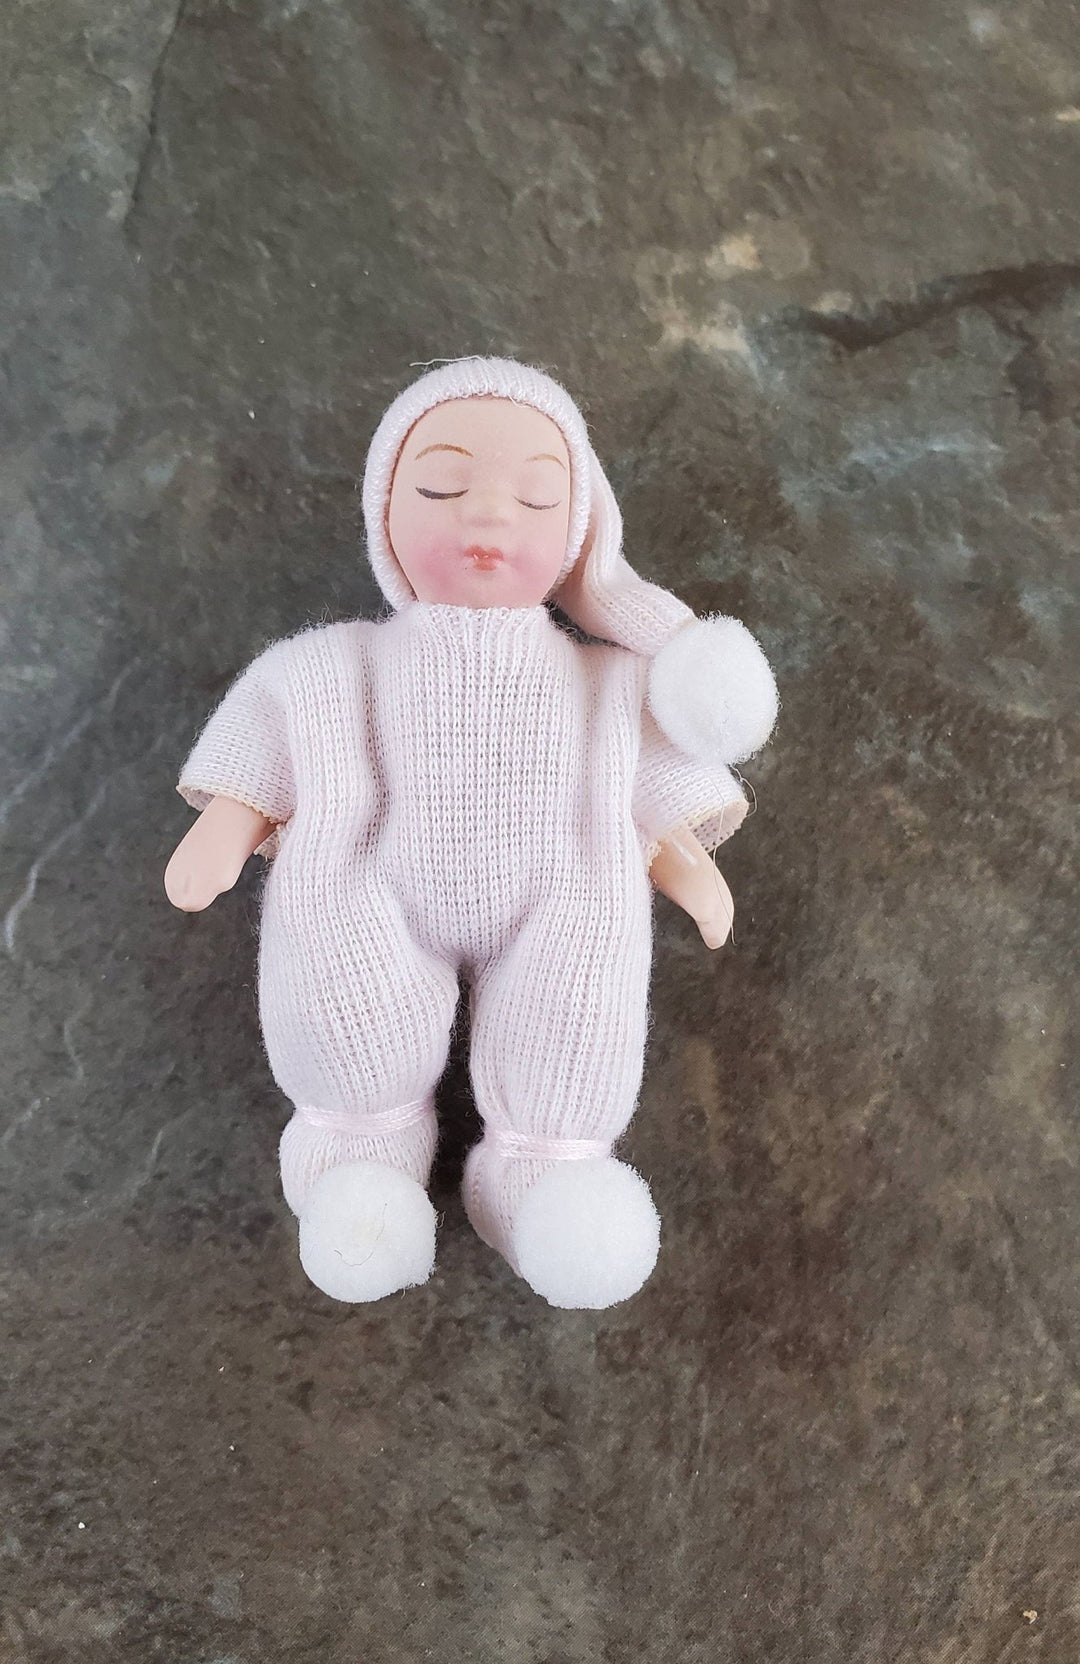 Dollhouse Miniature Baby Doll Porcelain Moveable 1:12 Scale Pink Sleeper - Miniature Crush